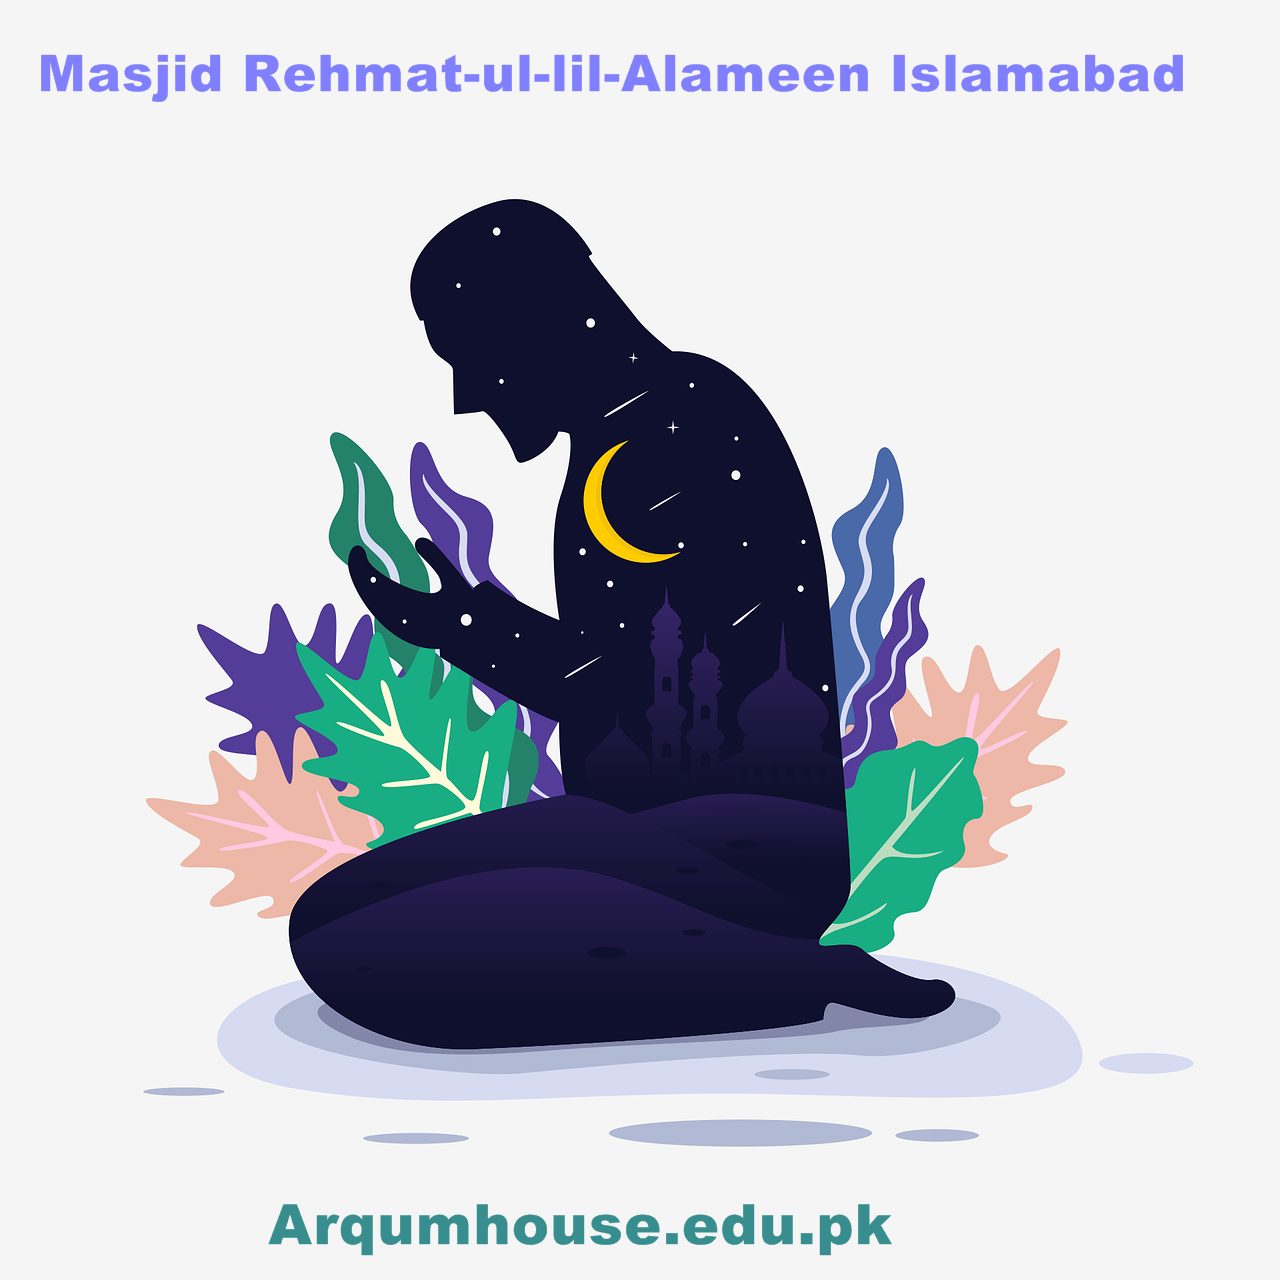 Salute to Masjid Rehmat-ul-lil-Alameen Islamabad, Facilities, Contact No For Donations